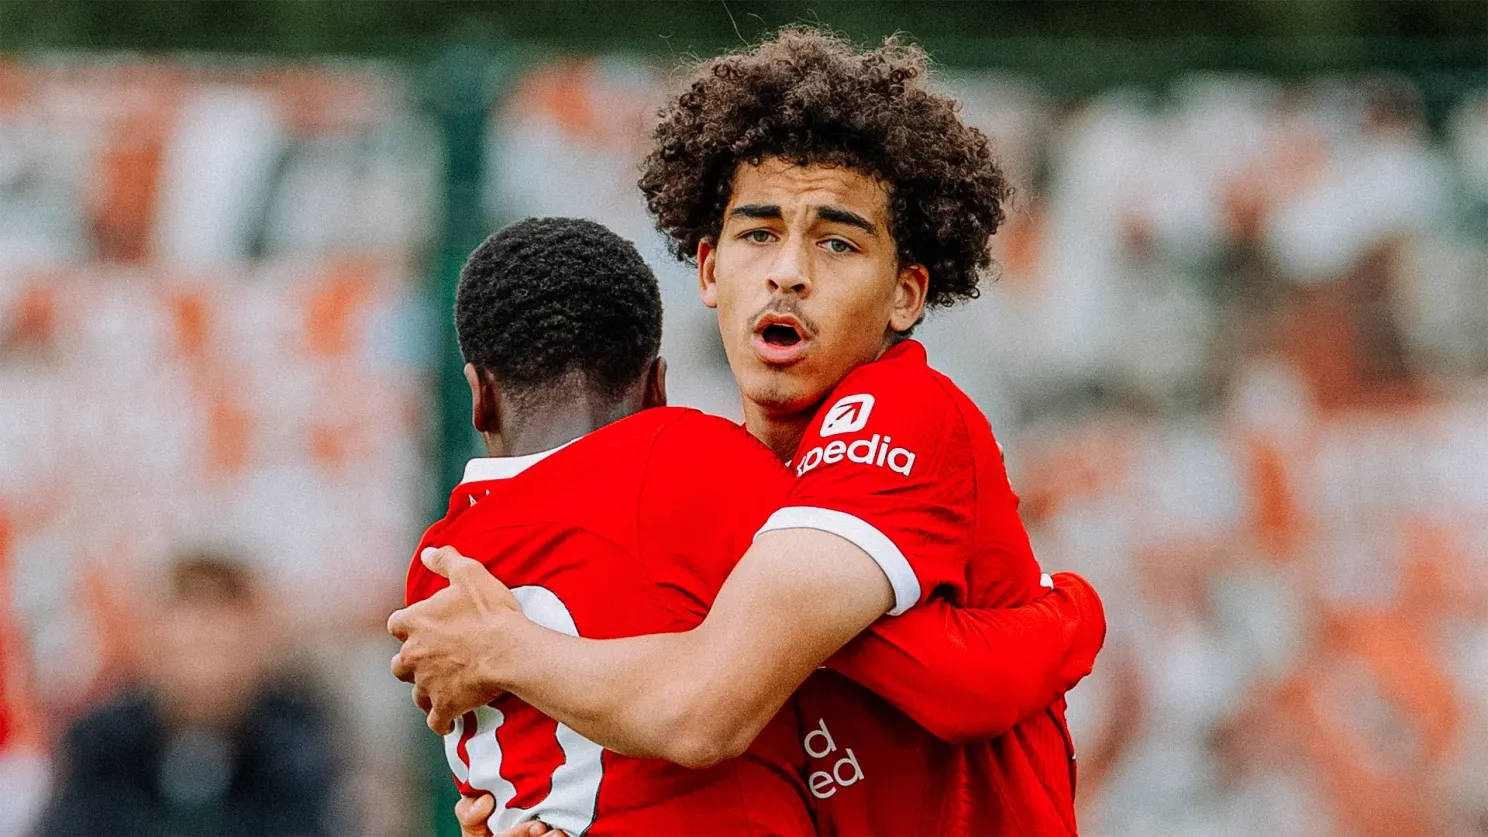 Who is Jayden Danns? Meet the 18-year-old goal machine from the Liverpool Academy